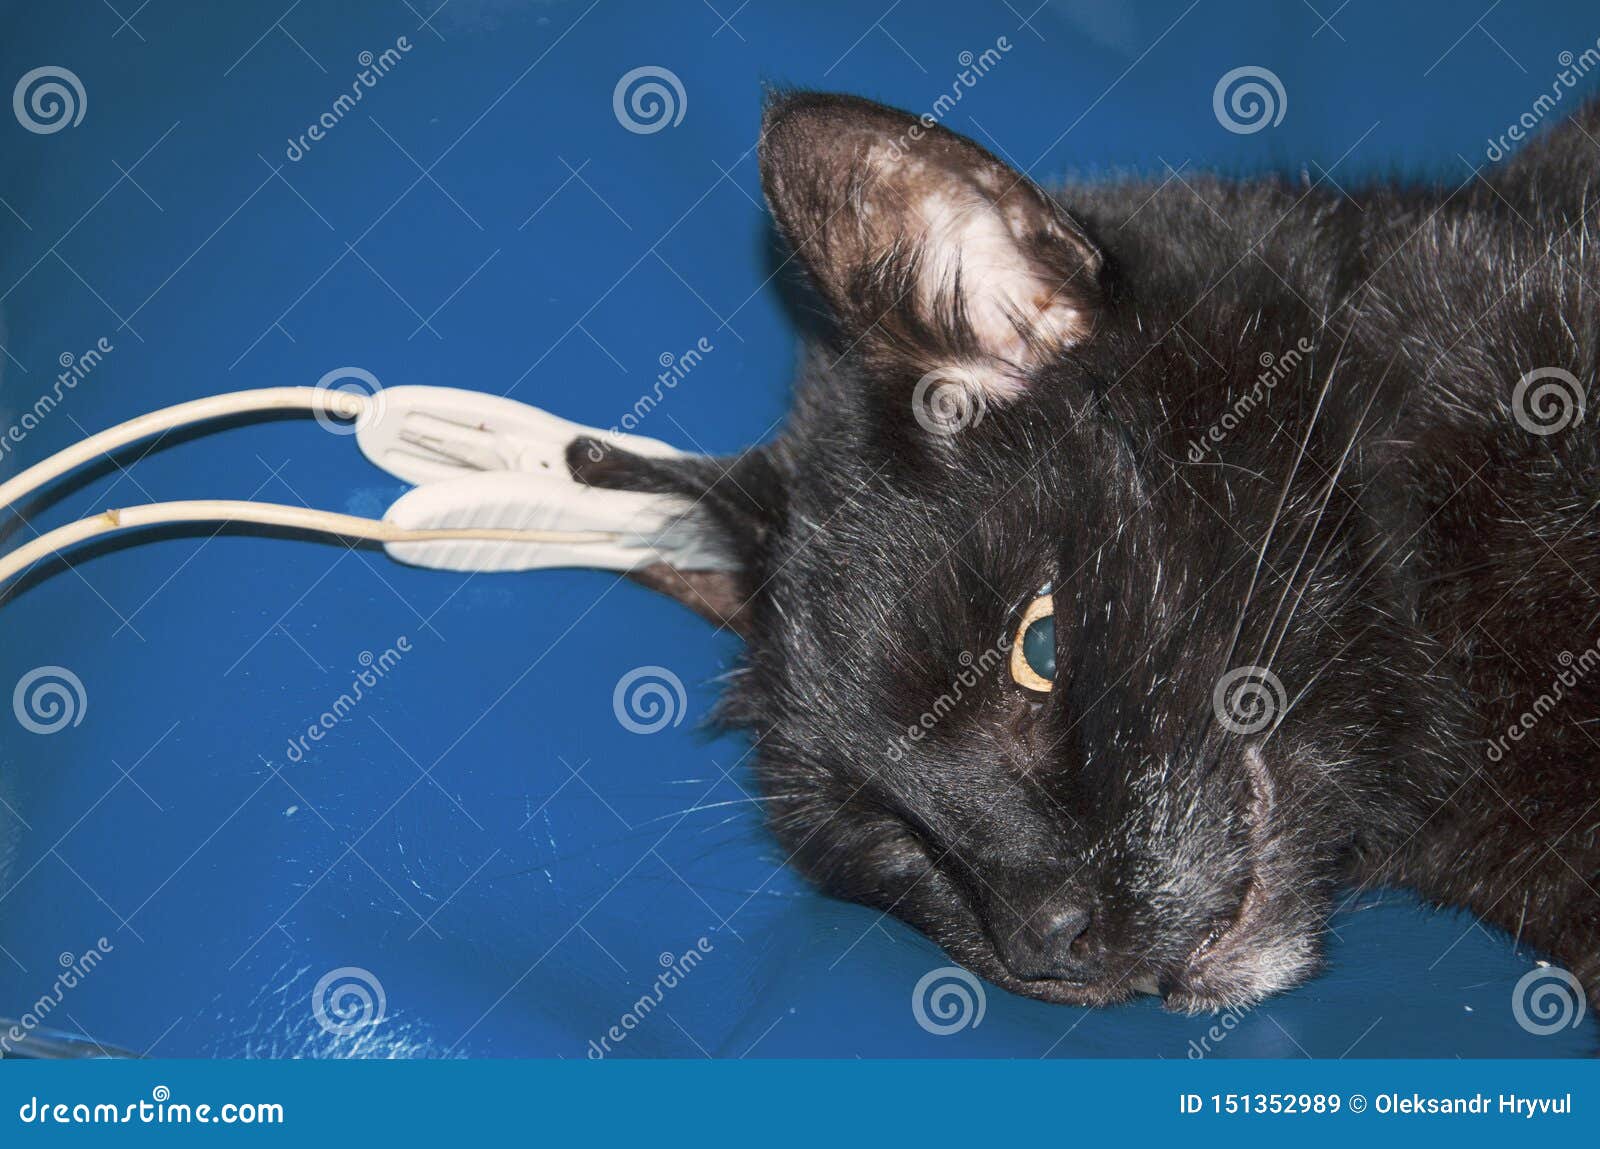 Black Cat Under Anesthesia Control Of Palpitation Heartbeat Pulse And Breathing Stock Image Image Of Eyes Castration 151352989